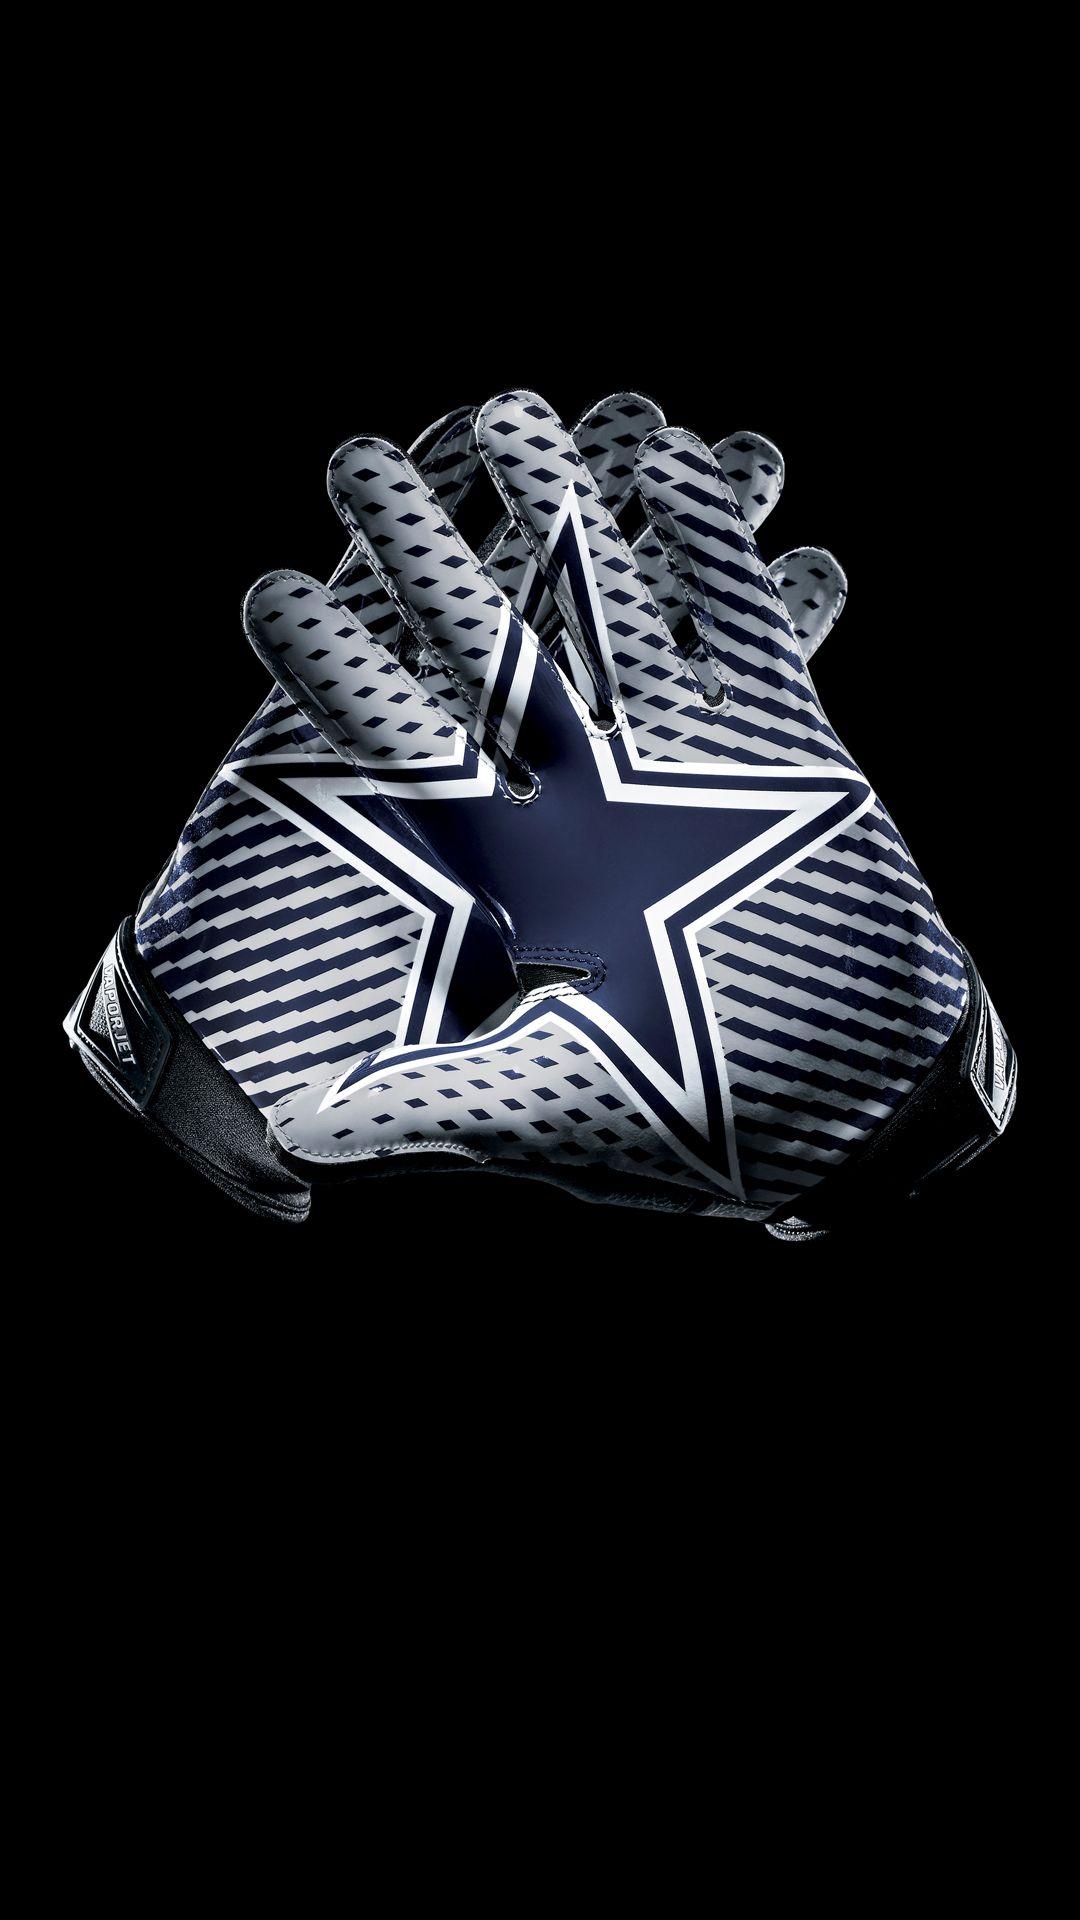 Dallas Cowboys Wallpapers For Cell Phones with dark backgrounds